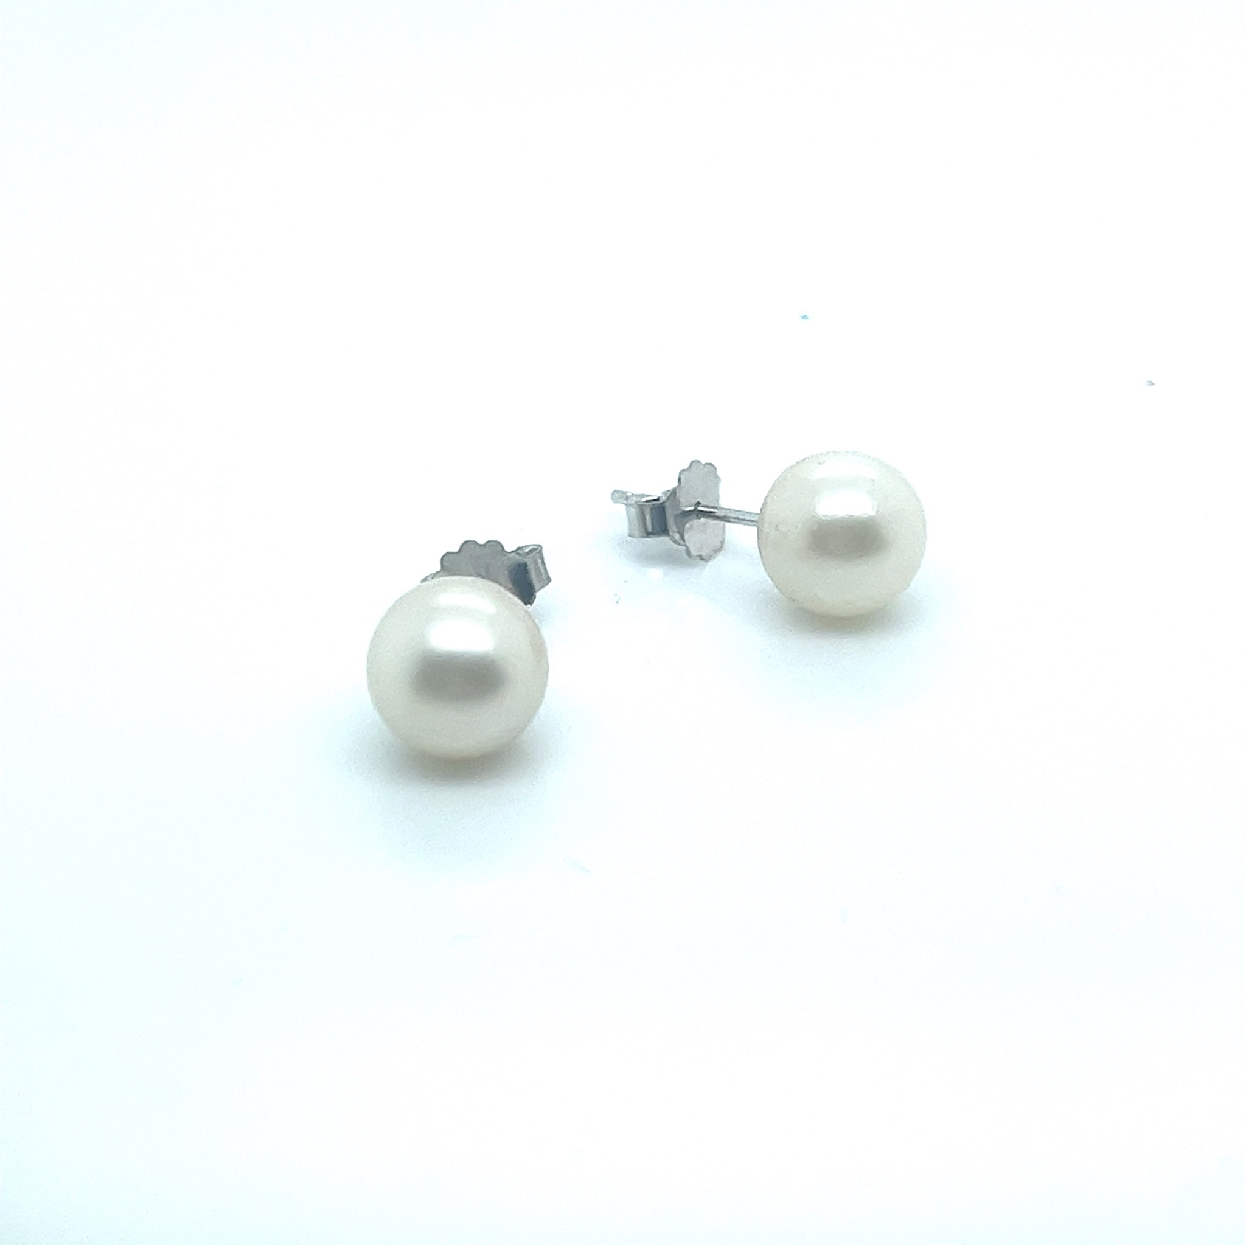 8mm Salt Water Pearl Stud Earrings on 14K White Gold Posts with Friction Backs